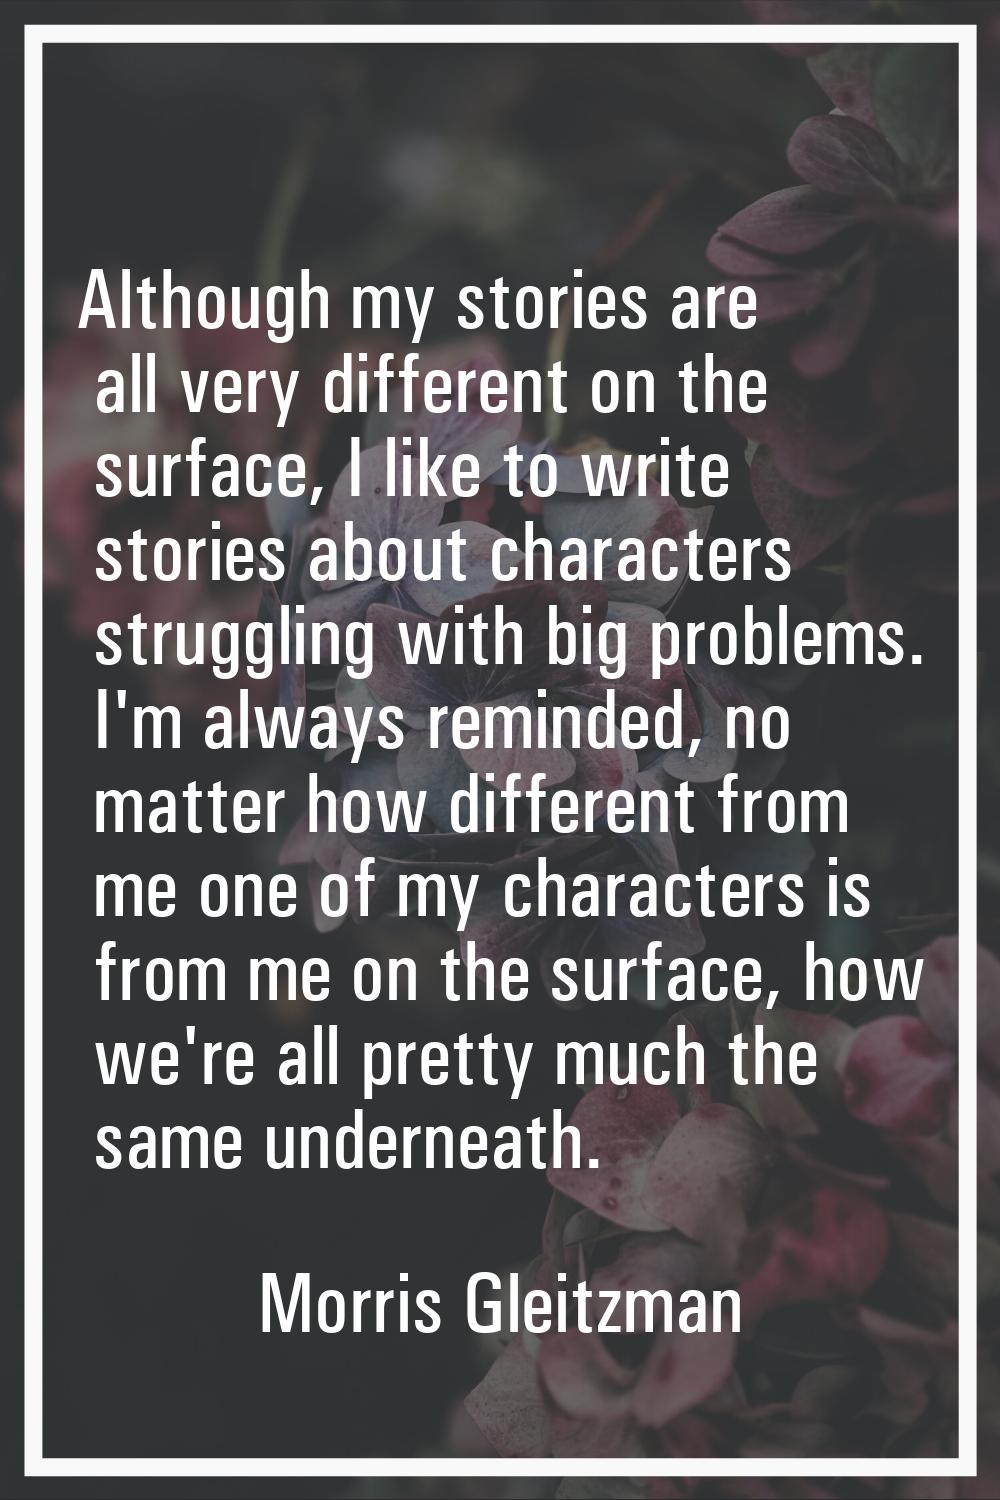 Although my stories are all very different on the surface, I like to write stories about characters